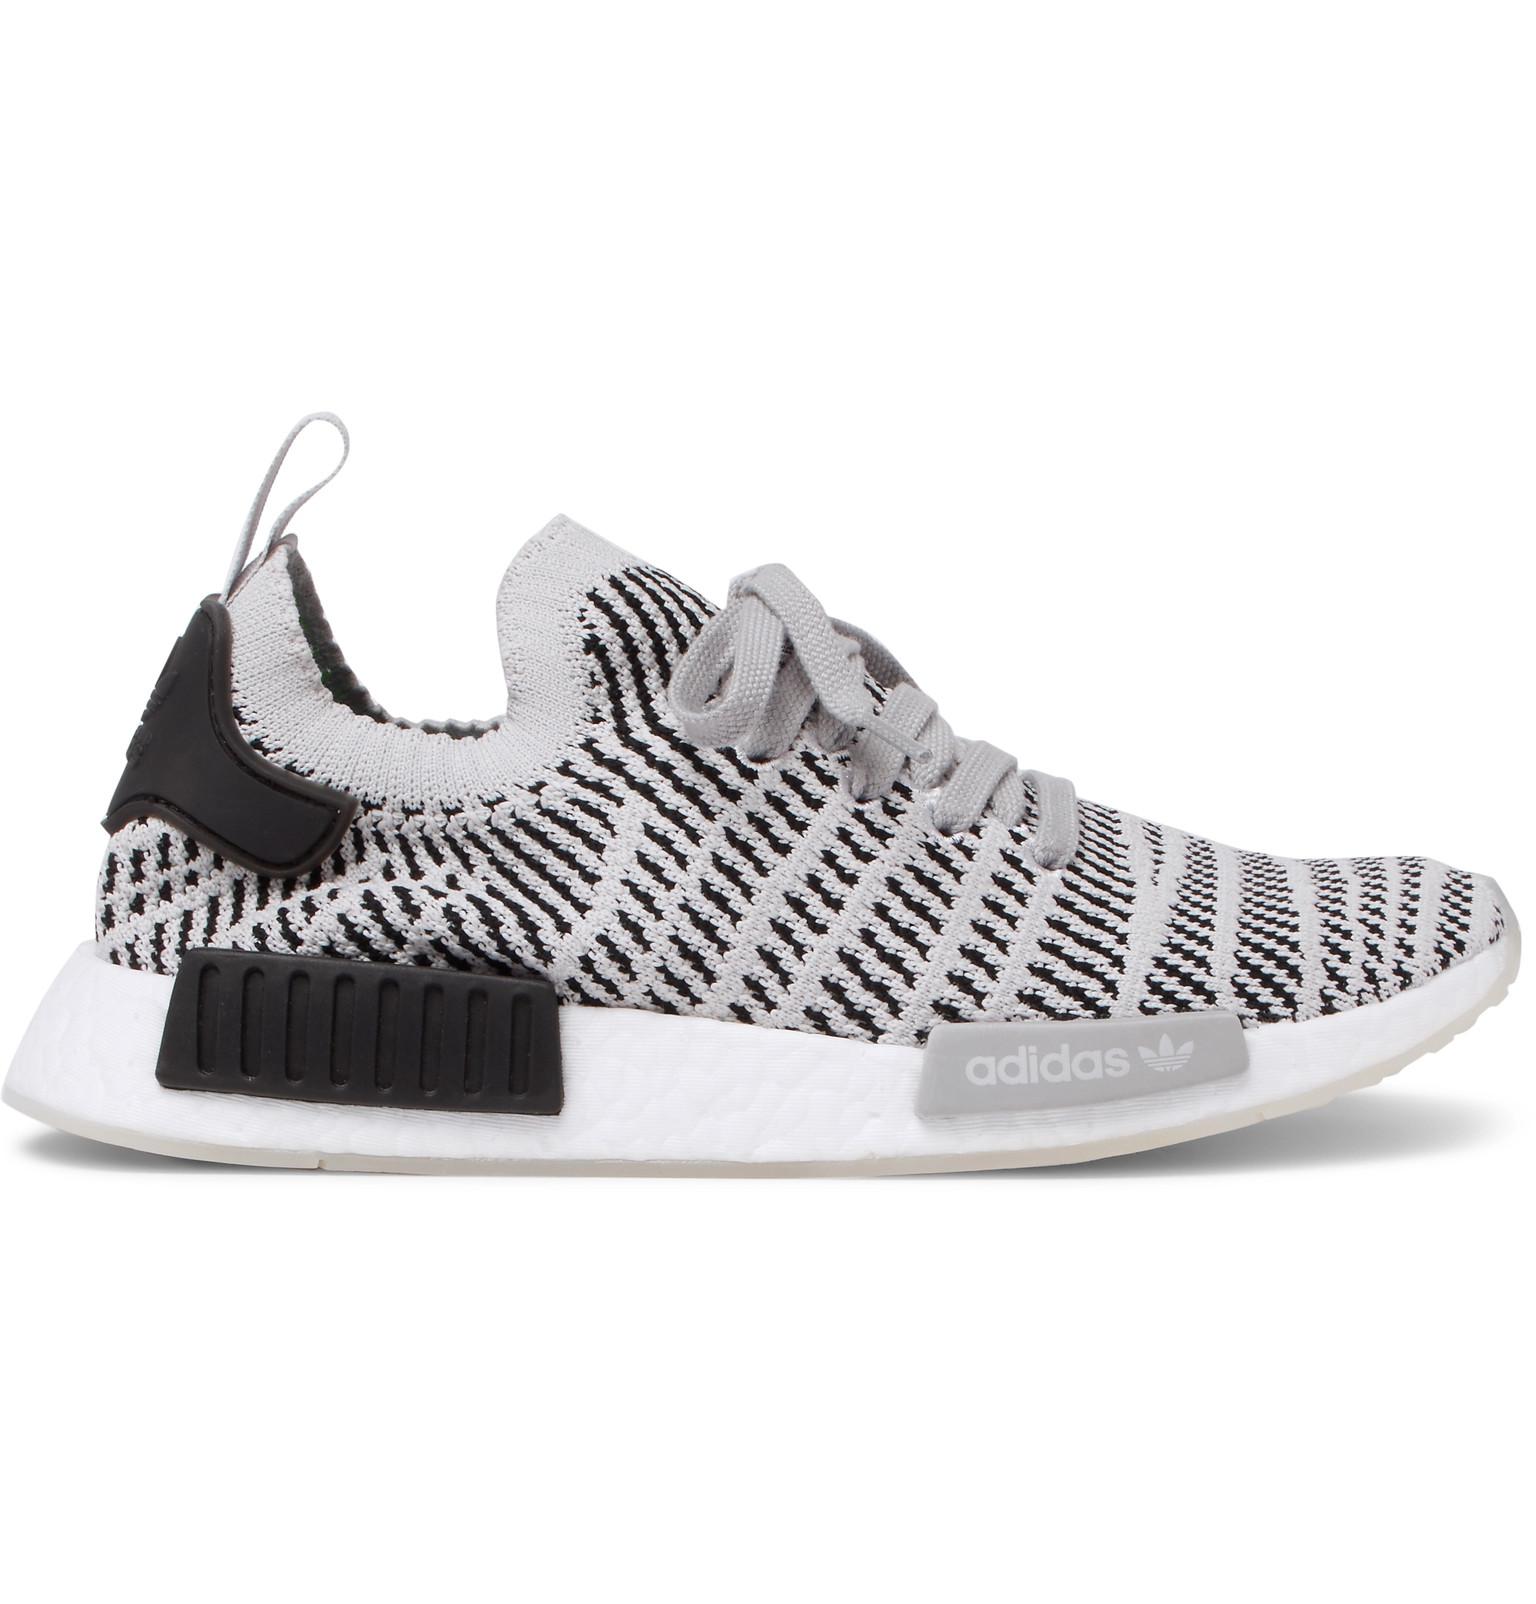 adidas originals nmd r1 stealth primeknit trainers in off white